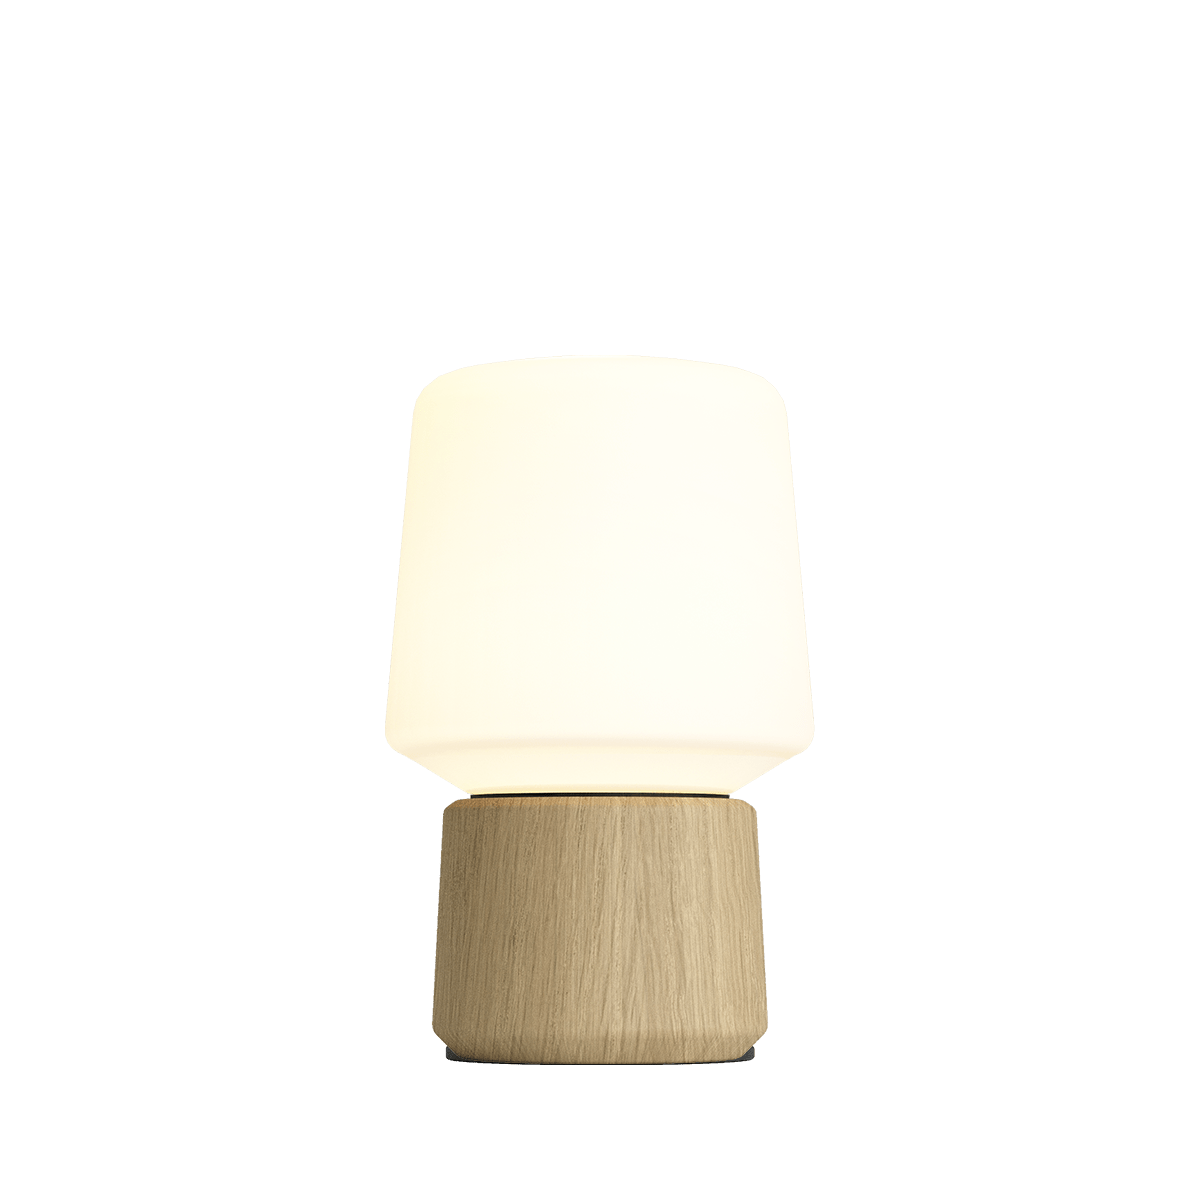 variant_600228% | Ambience - Lamp Intelligent + Oslo base [Contract] - Natural Oak 5 | SACKit